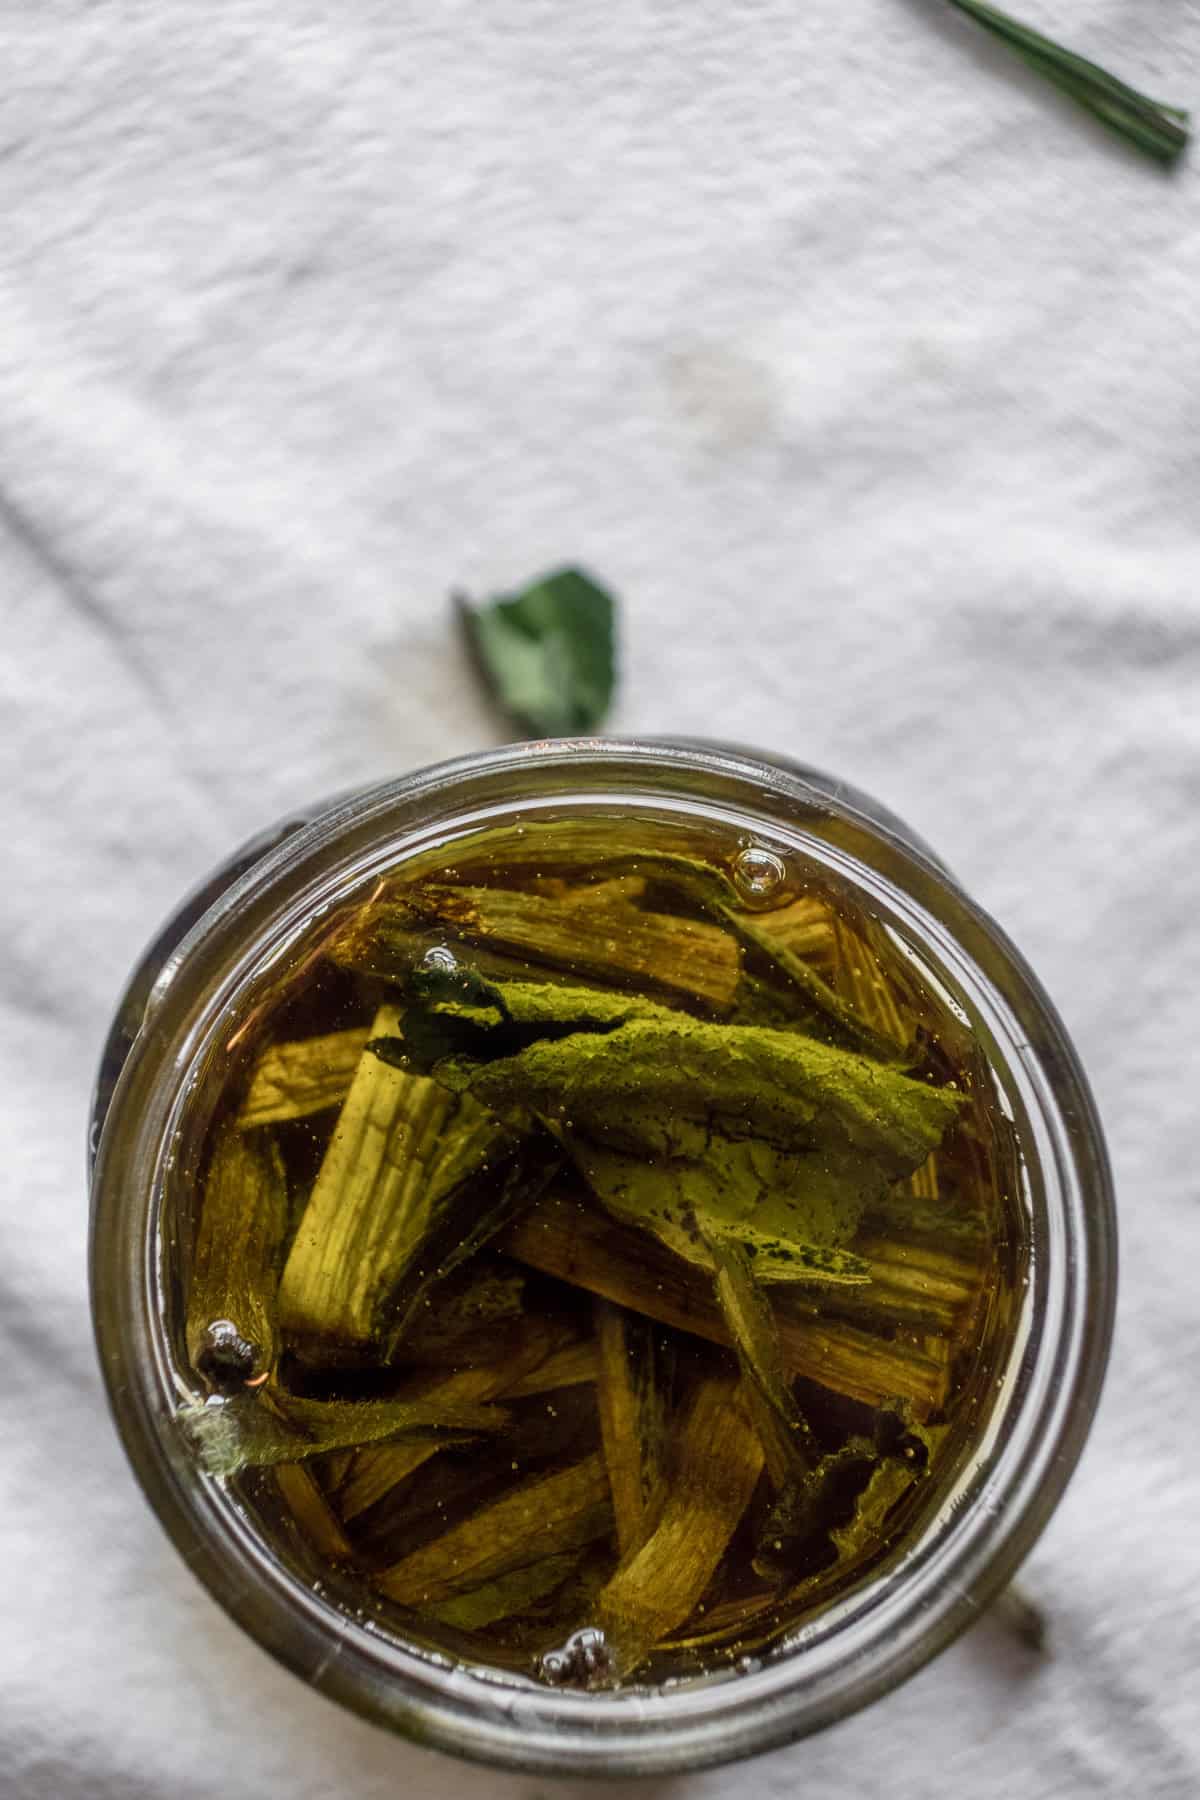 Infusing comfrey oil in a jar